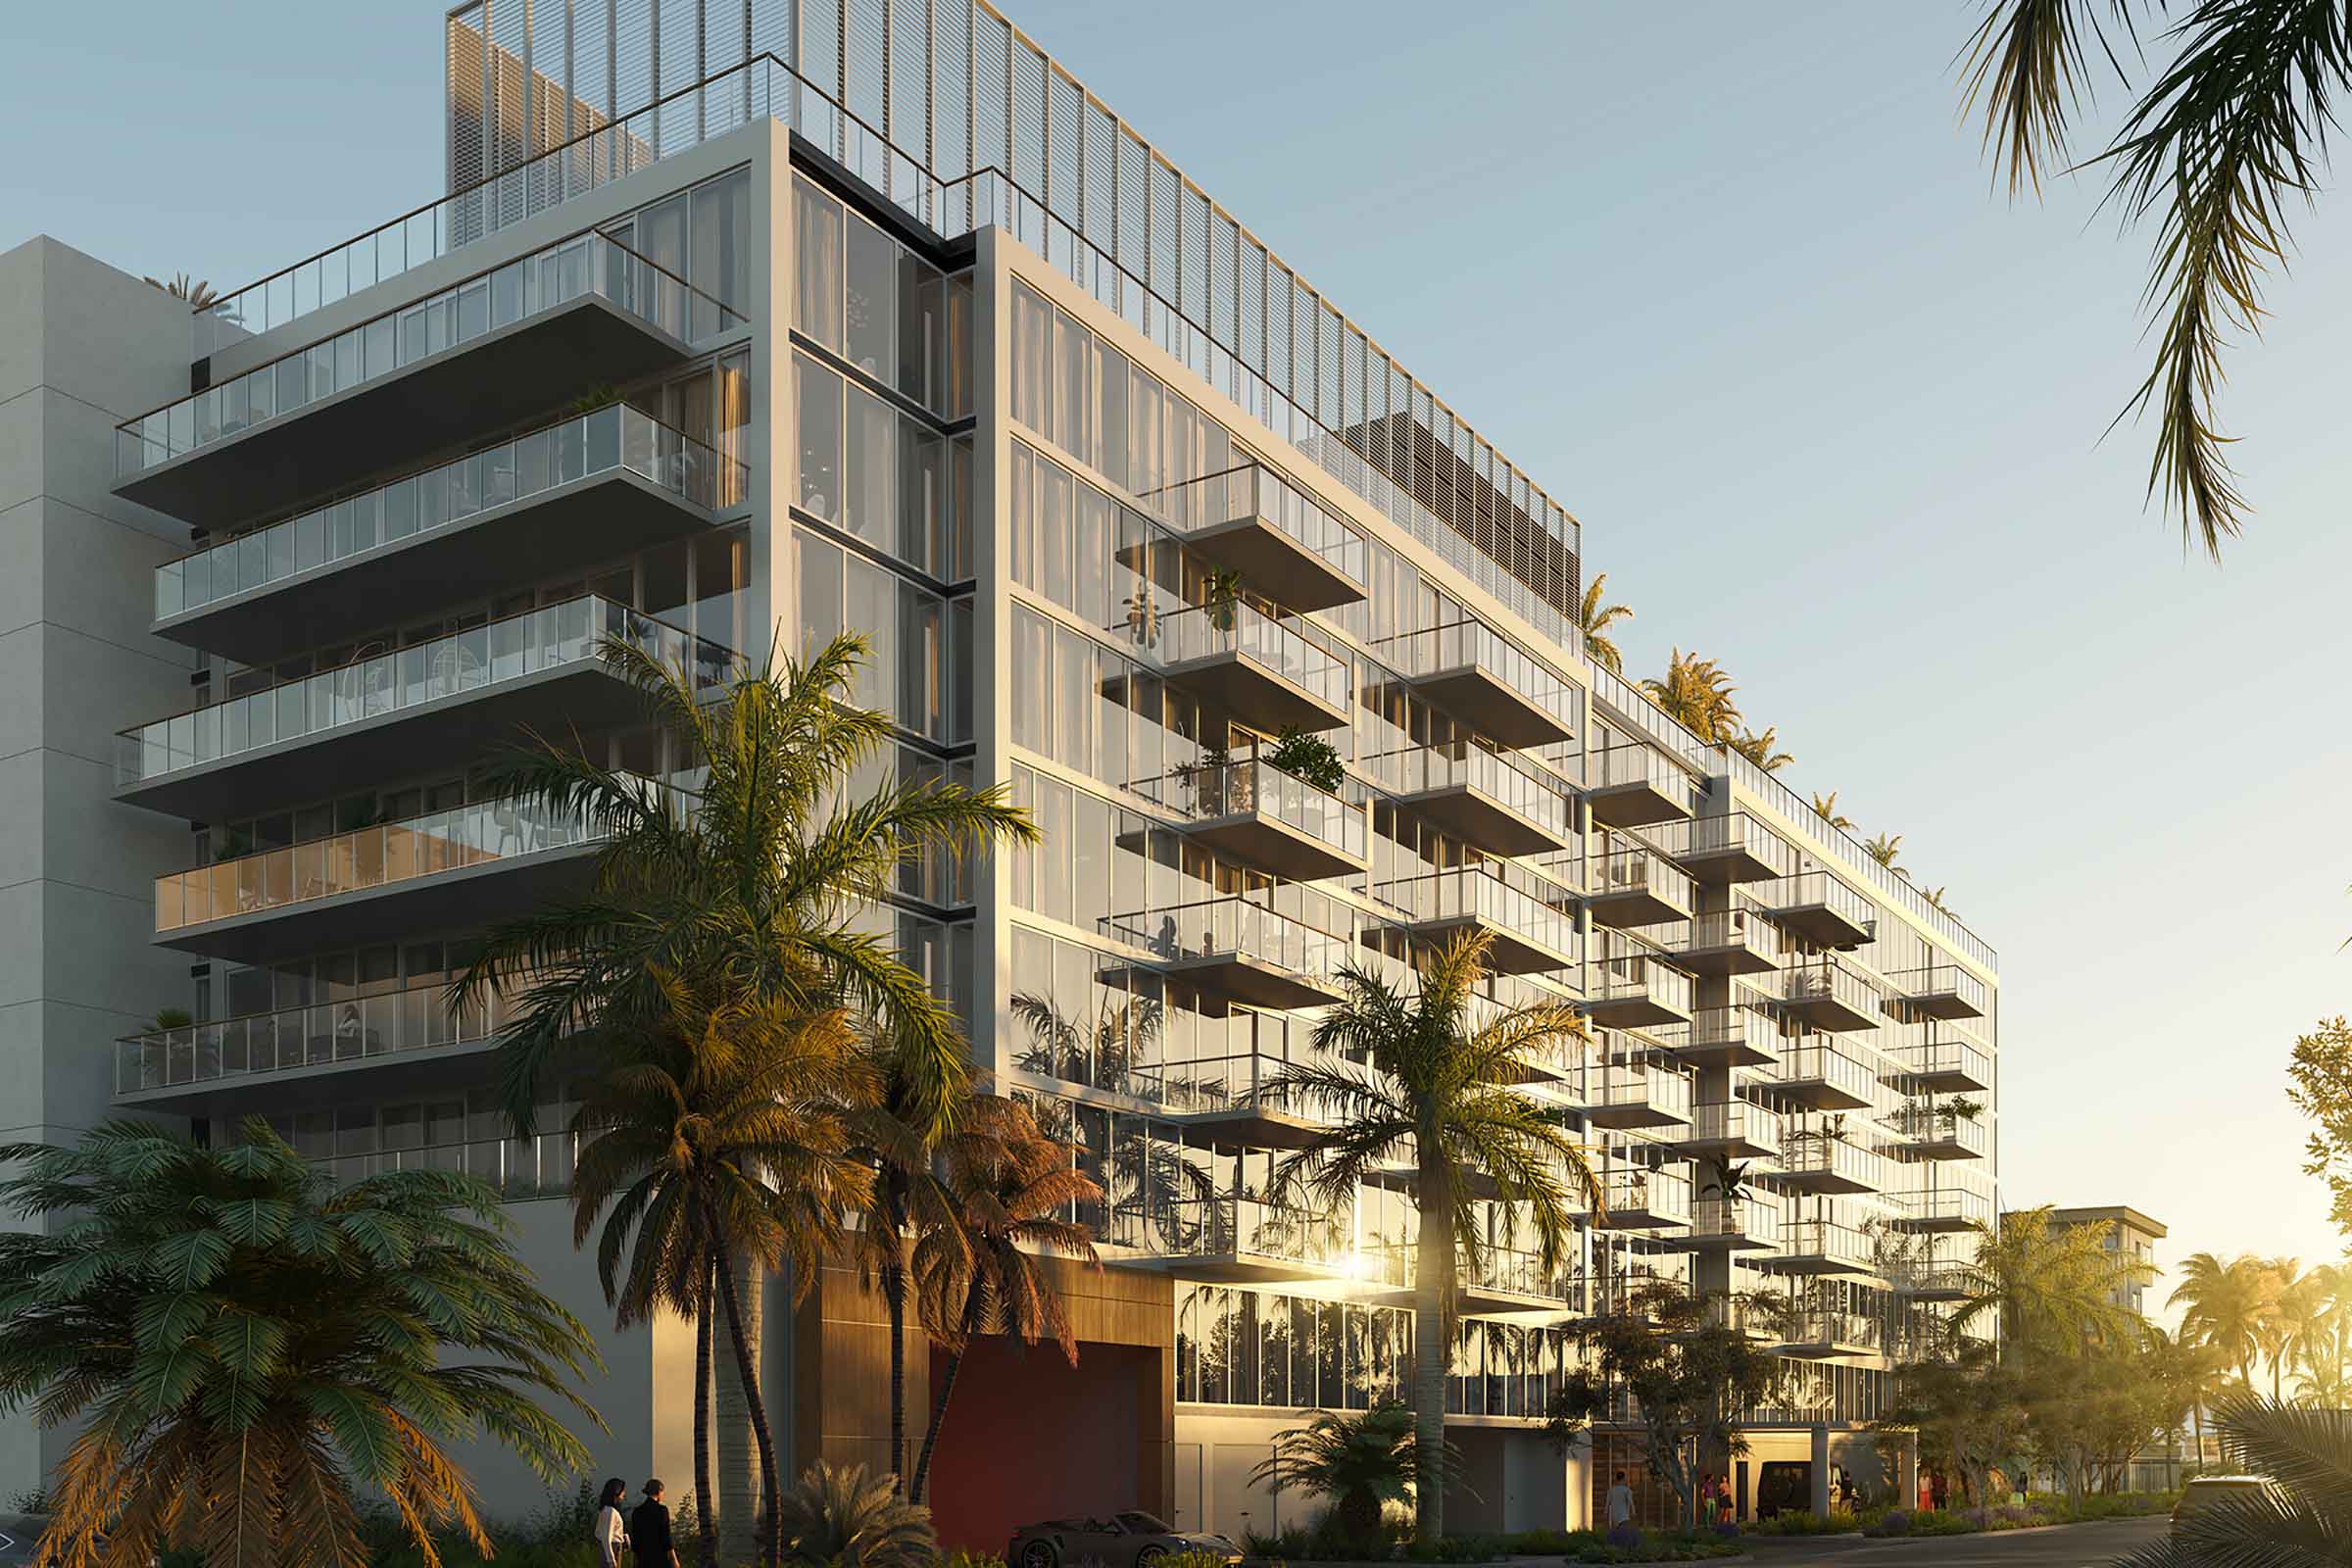 Rendering of THE WELL Bay Harbor Islands Condos